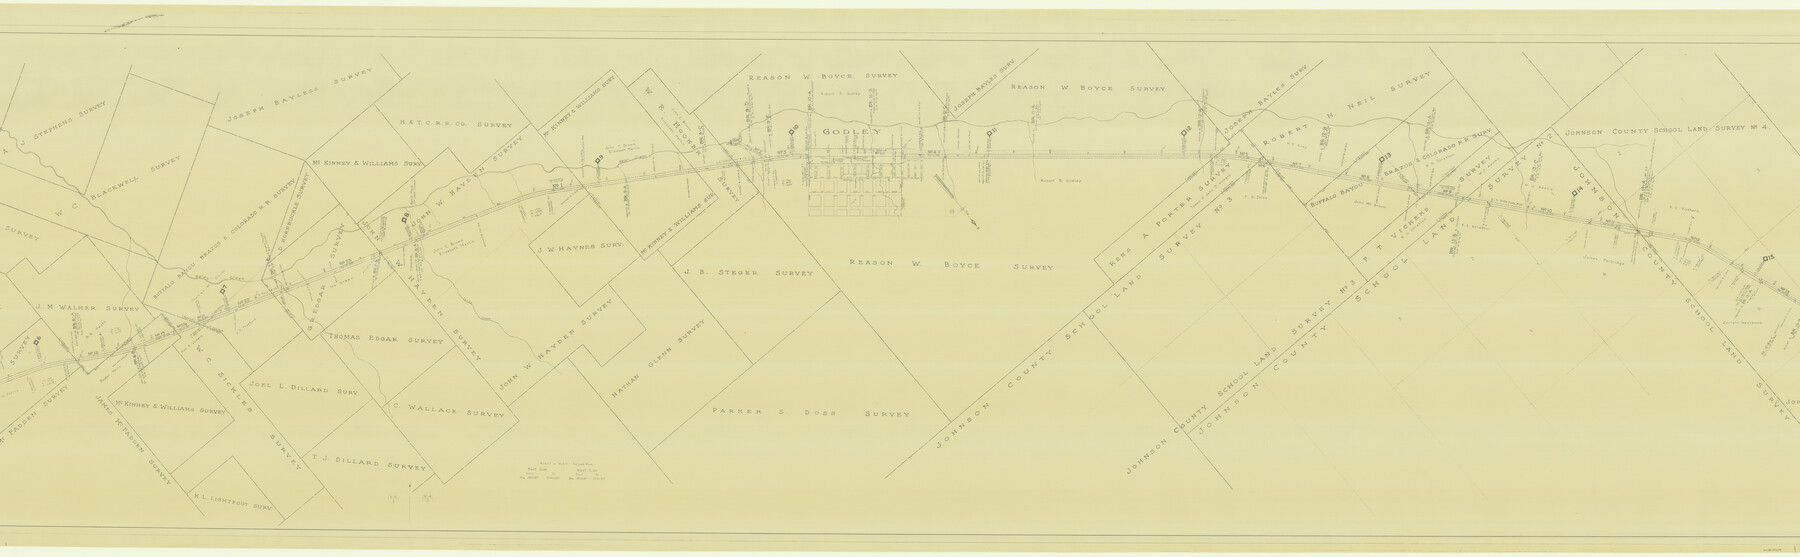 64648, [G. C. & S. F. Ry. Northern-Division, Alignment and Right of Way Map, Weatherford Branch, Johnson and Hood Counties, Texas], General Map Collection